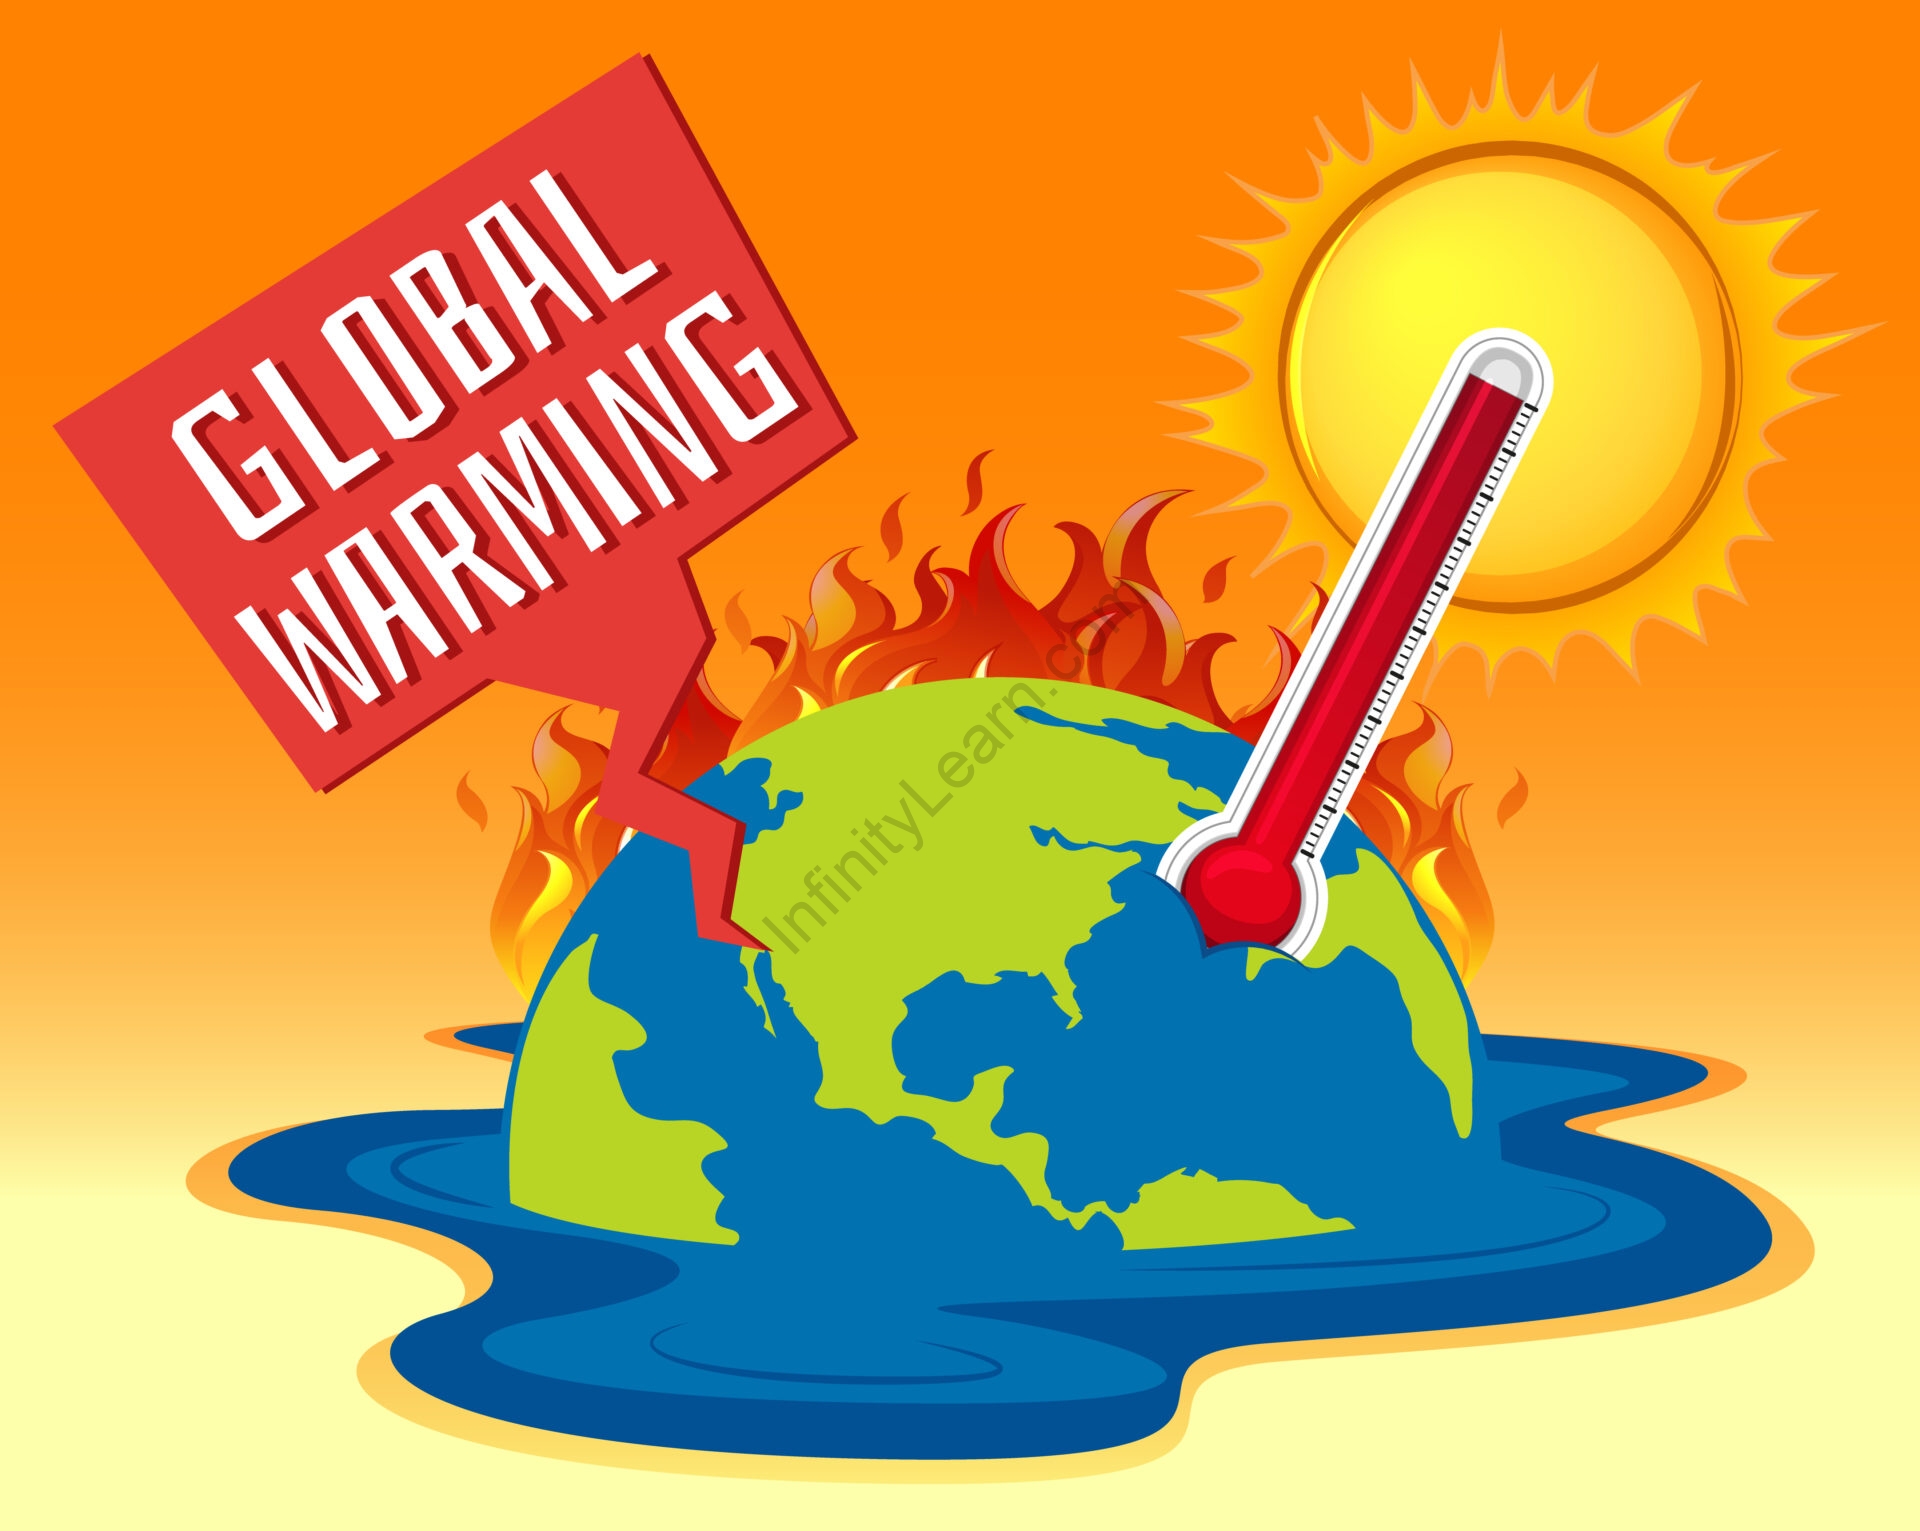 essay on global warming in 500 words